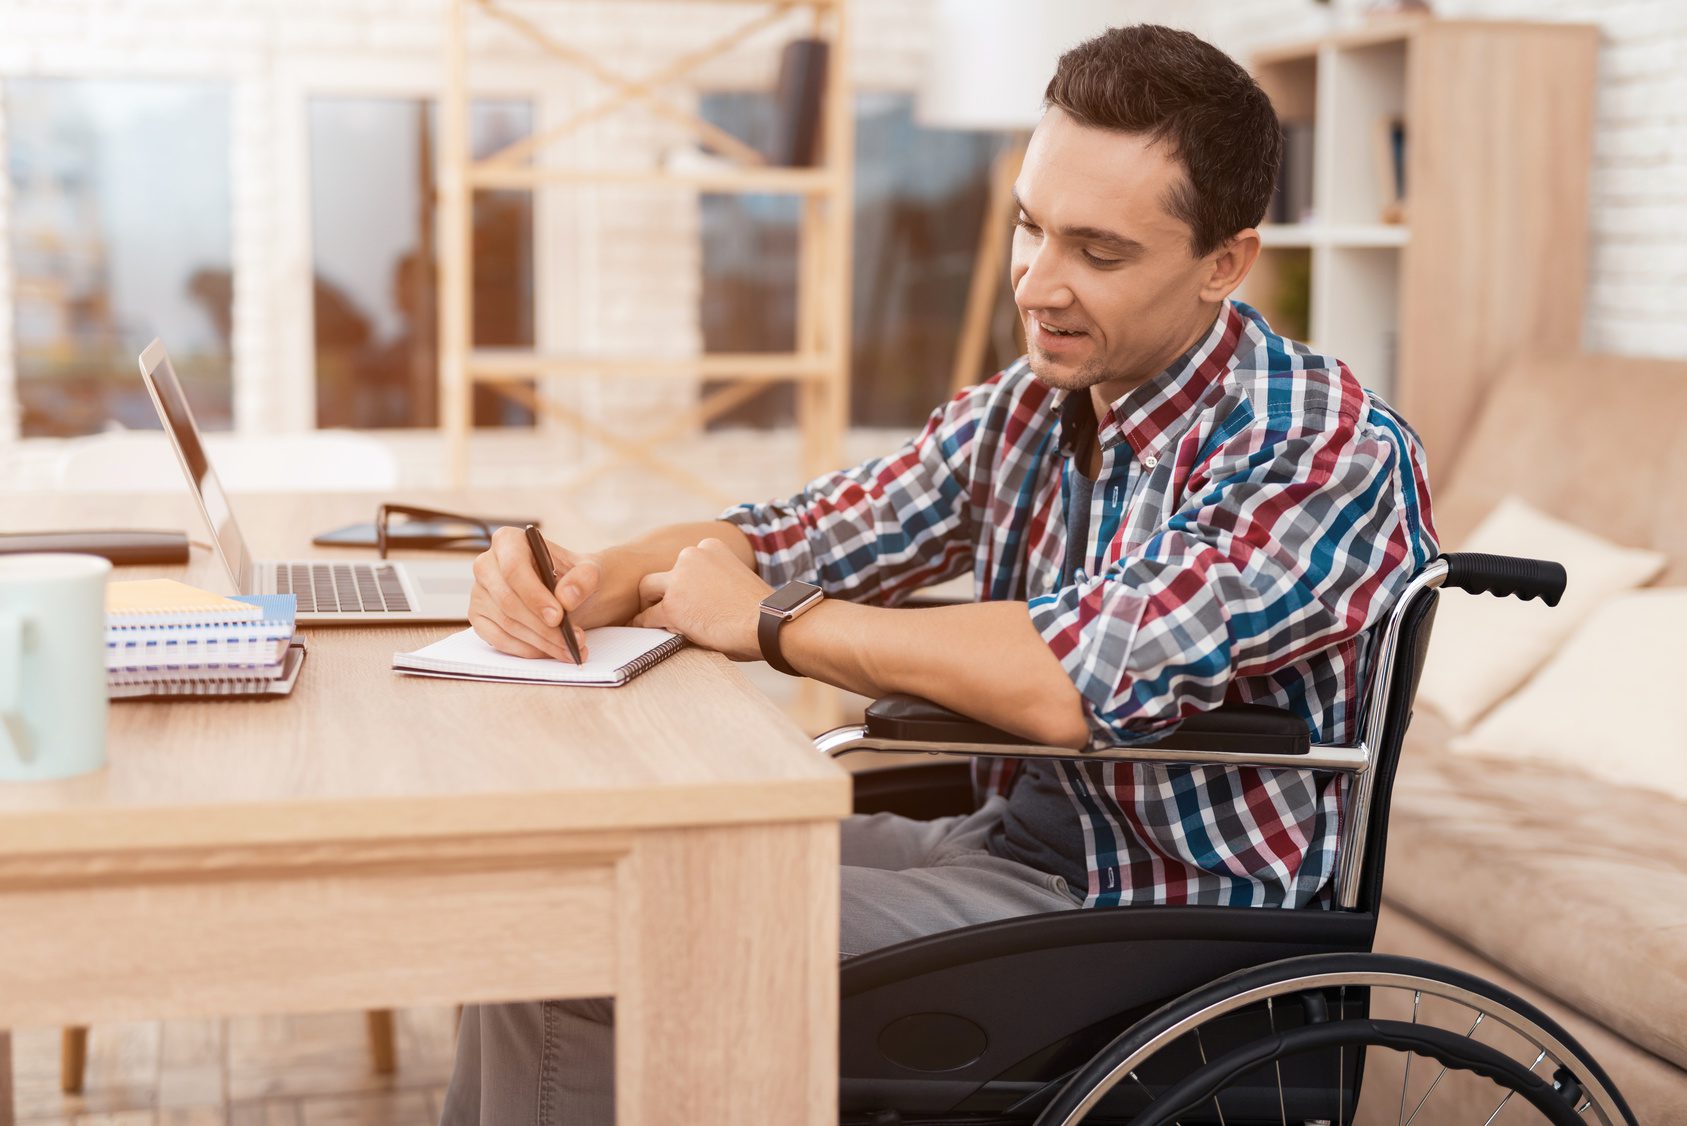 What “Reasonable Accommodations” Can I Request From My Employer?